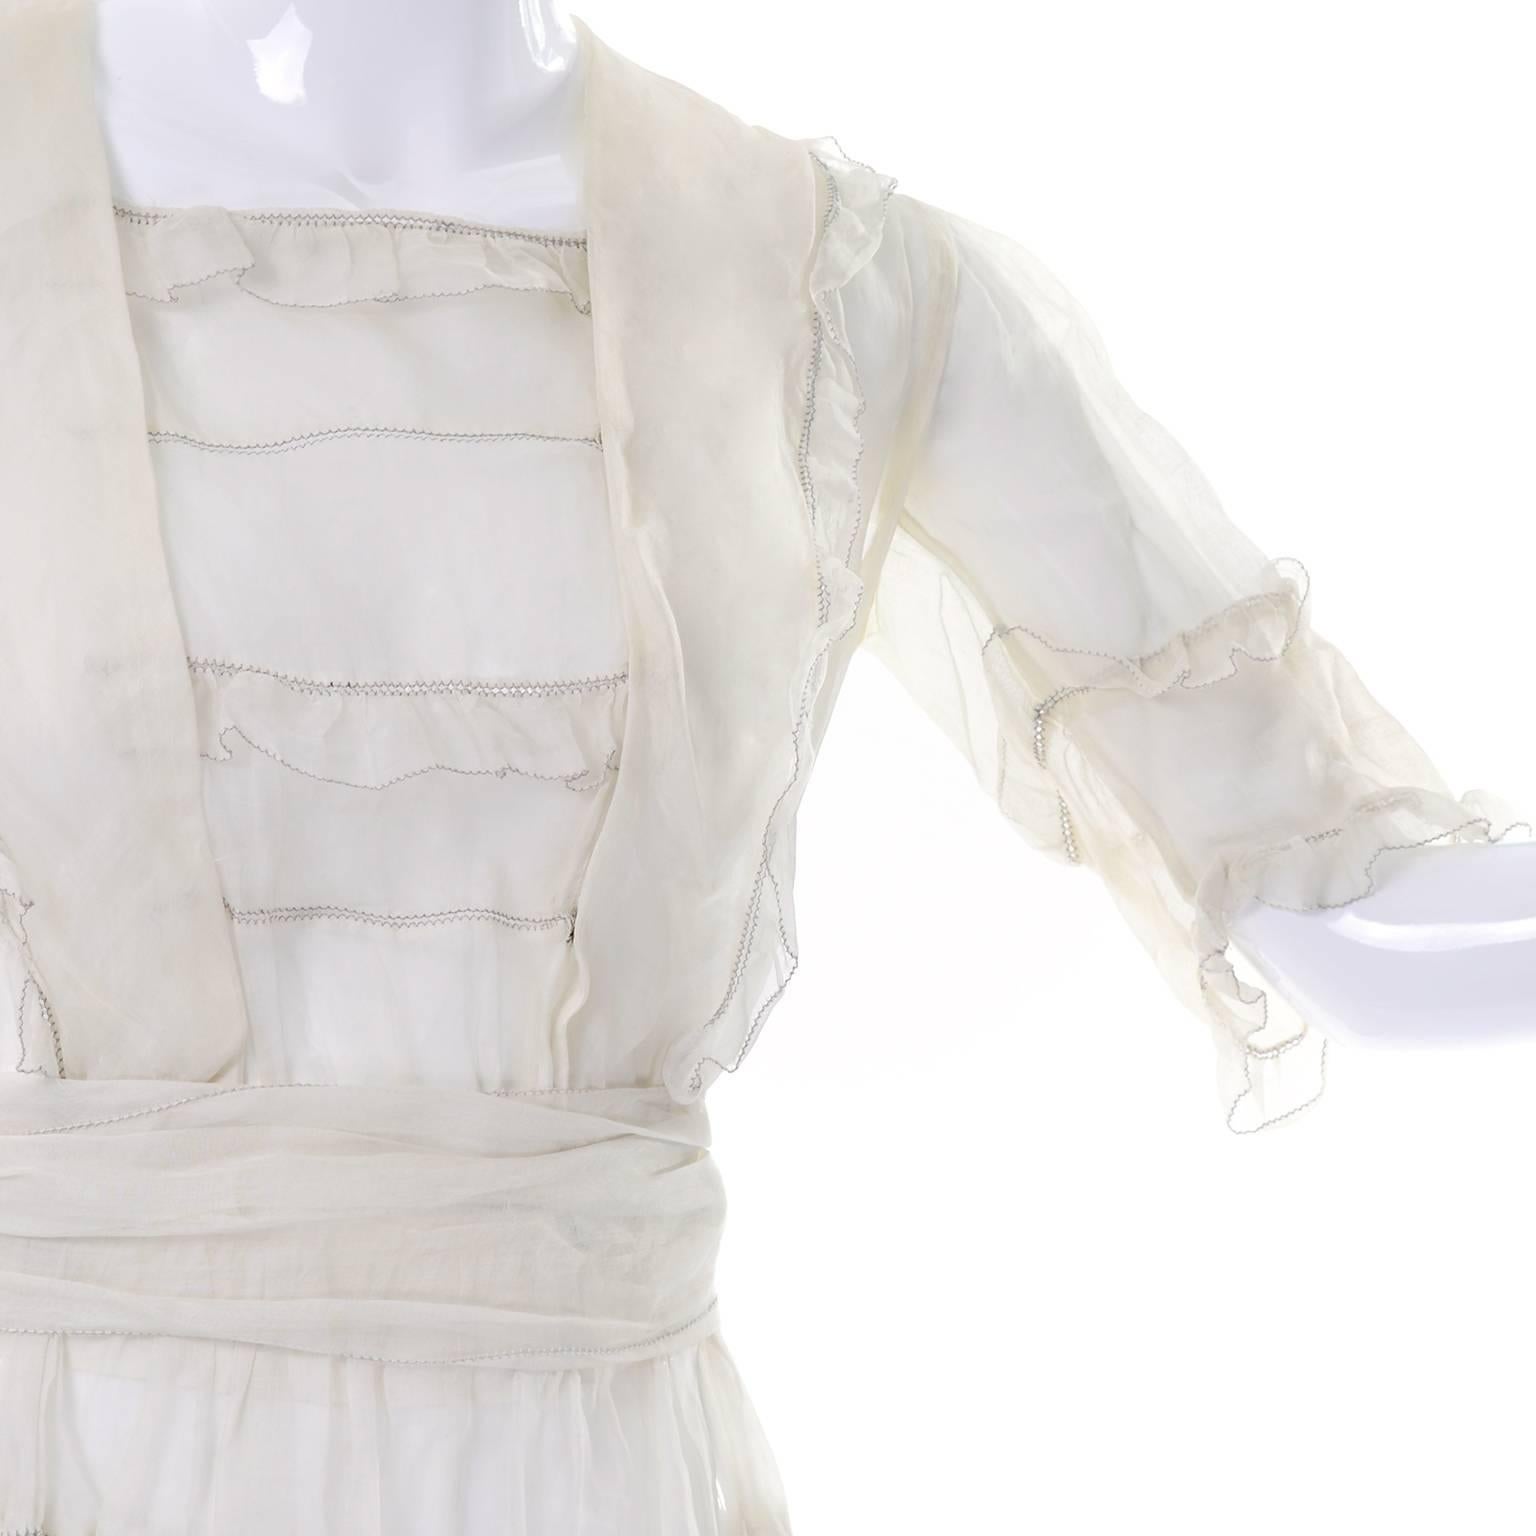 This is a beautiful off white vintage Edwardian organdy dress with ruffles and a sash. The dress has three quarter length sleeves , a snap in front panel and is sheer. We estimate this would fit size 4/6. This dress would make a wonderful wedding